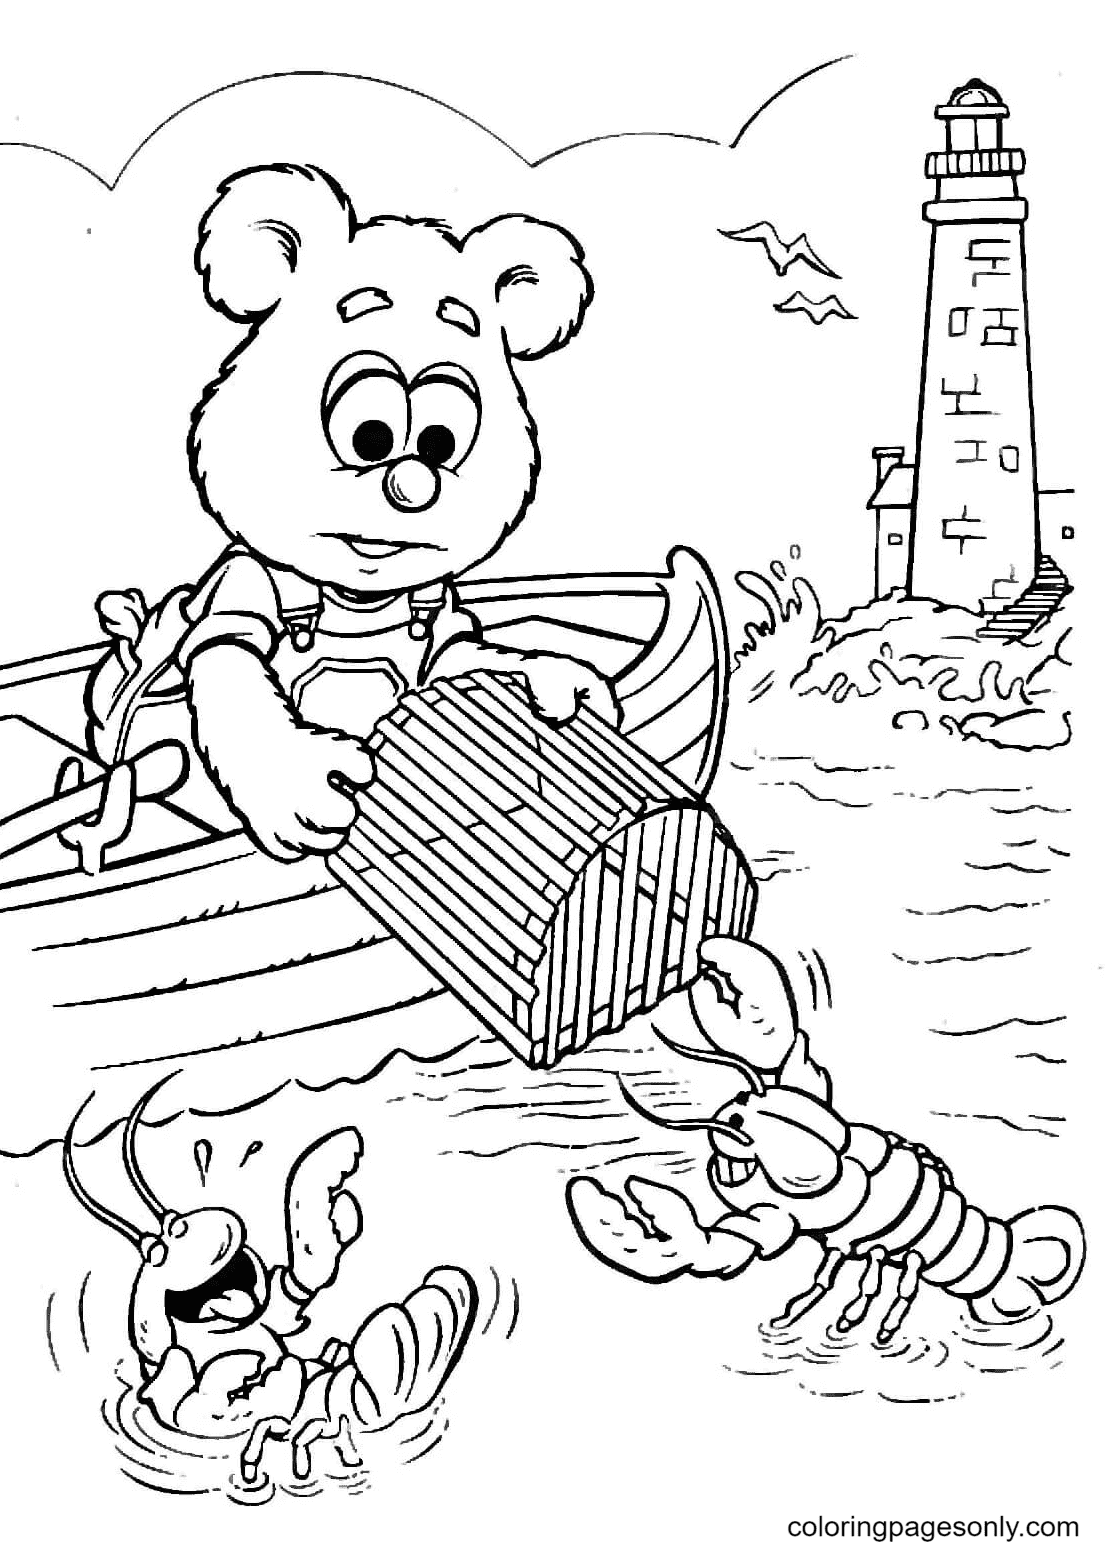 Fozzie is fishing for Lobsters Coloring Page